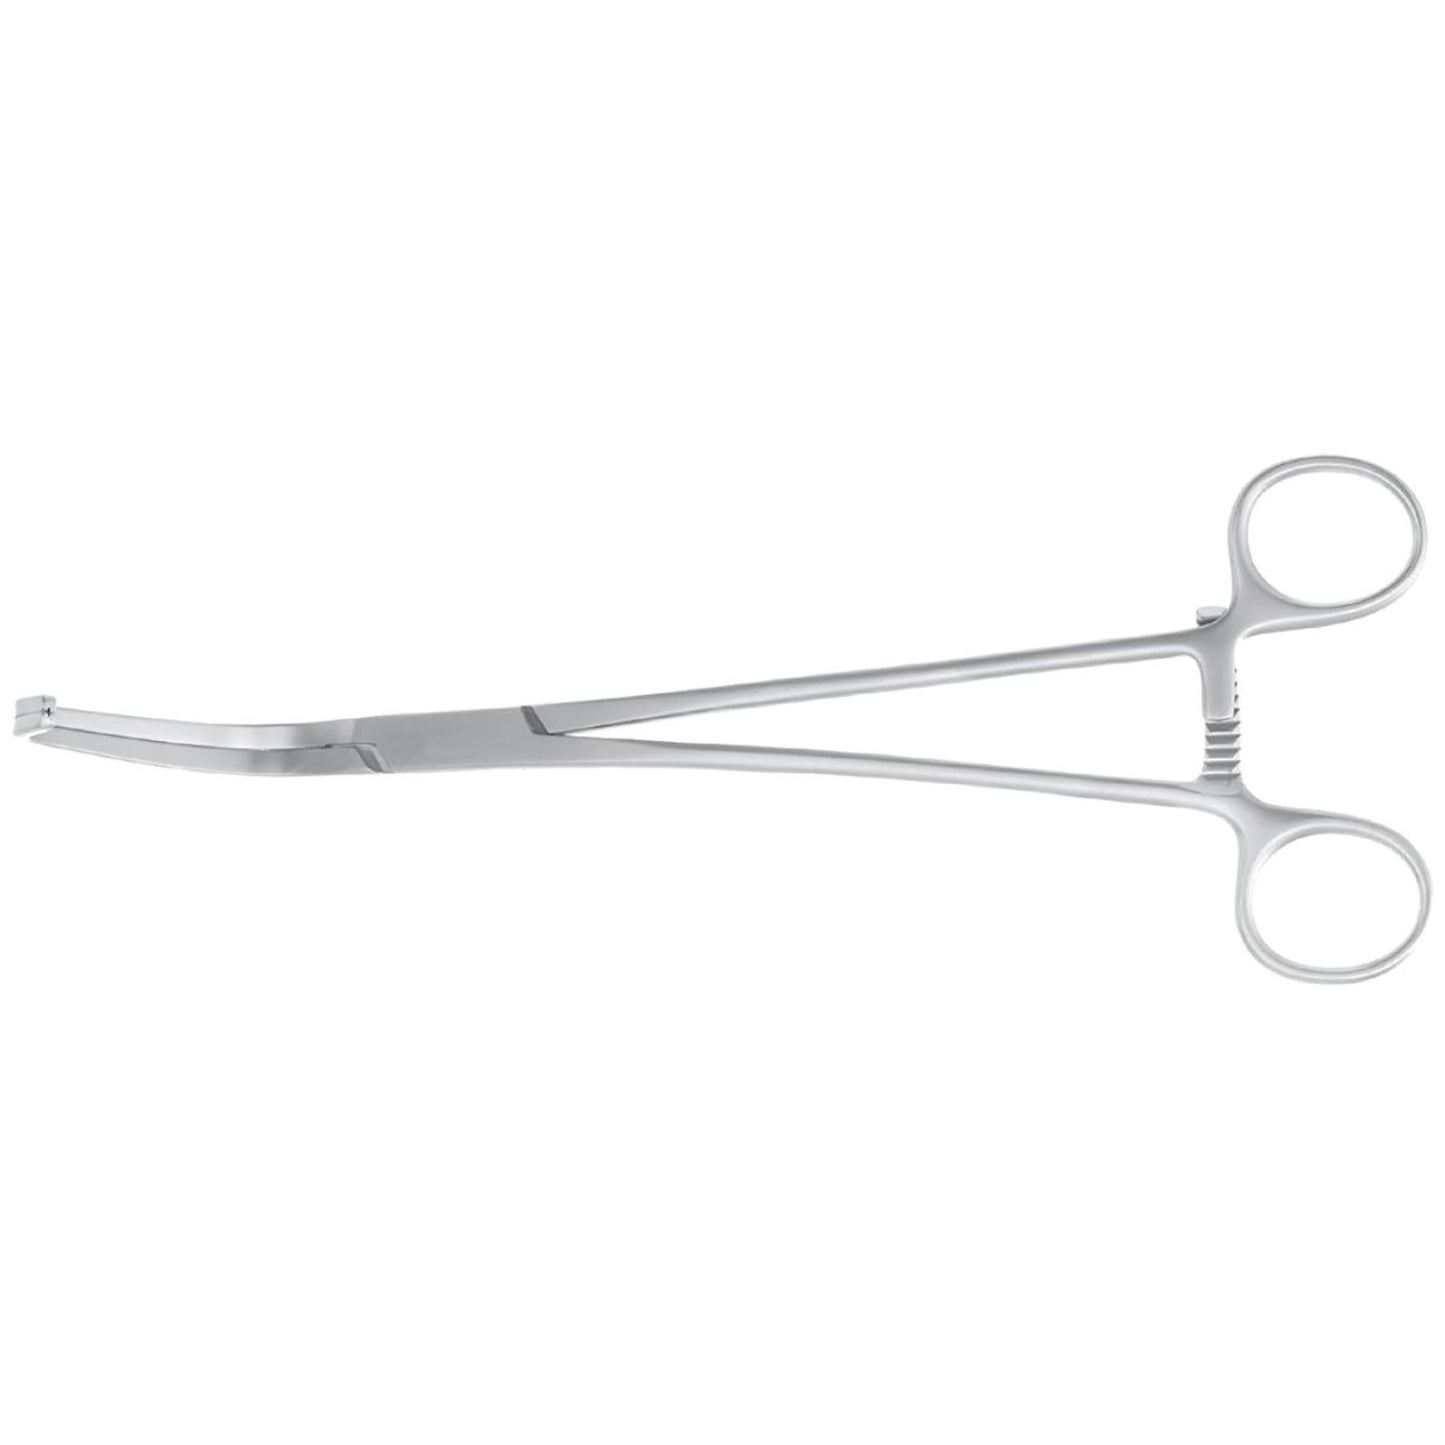 Cooley Aorta Clamp